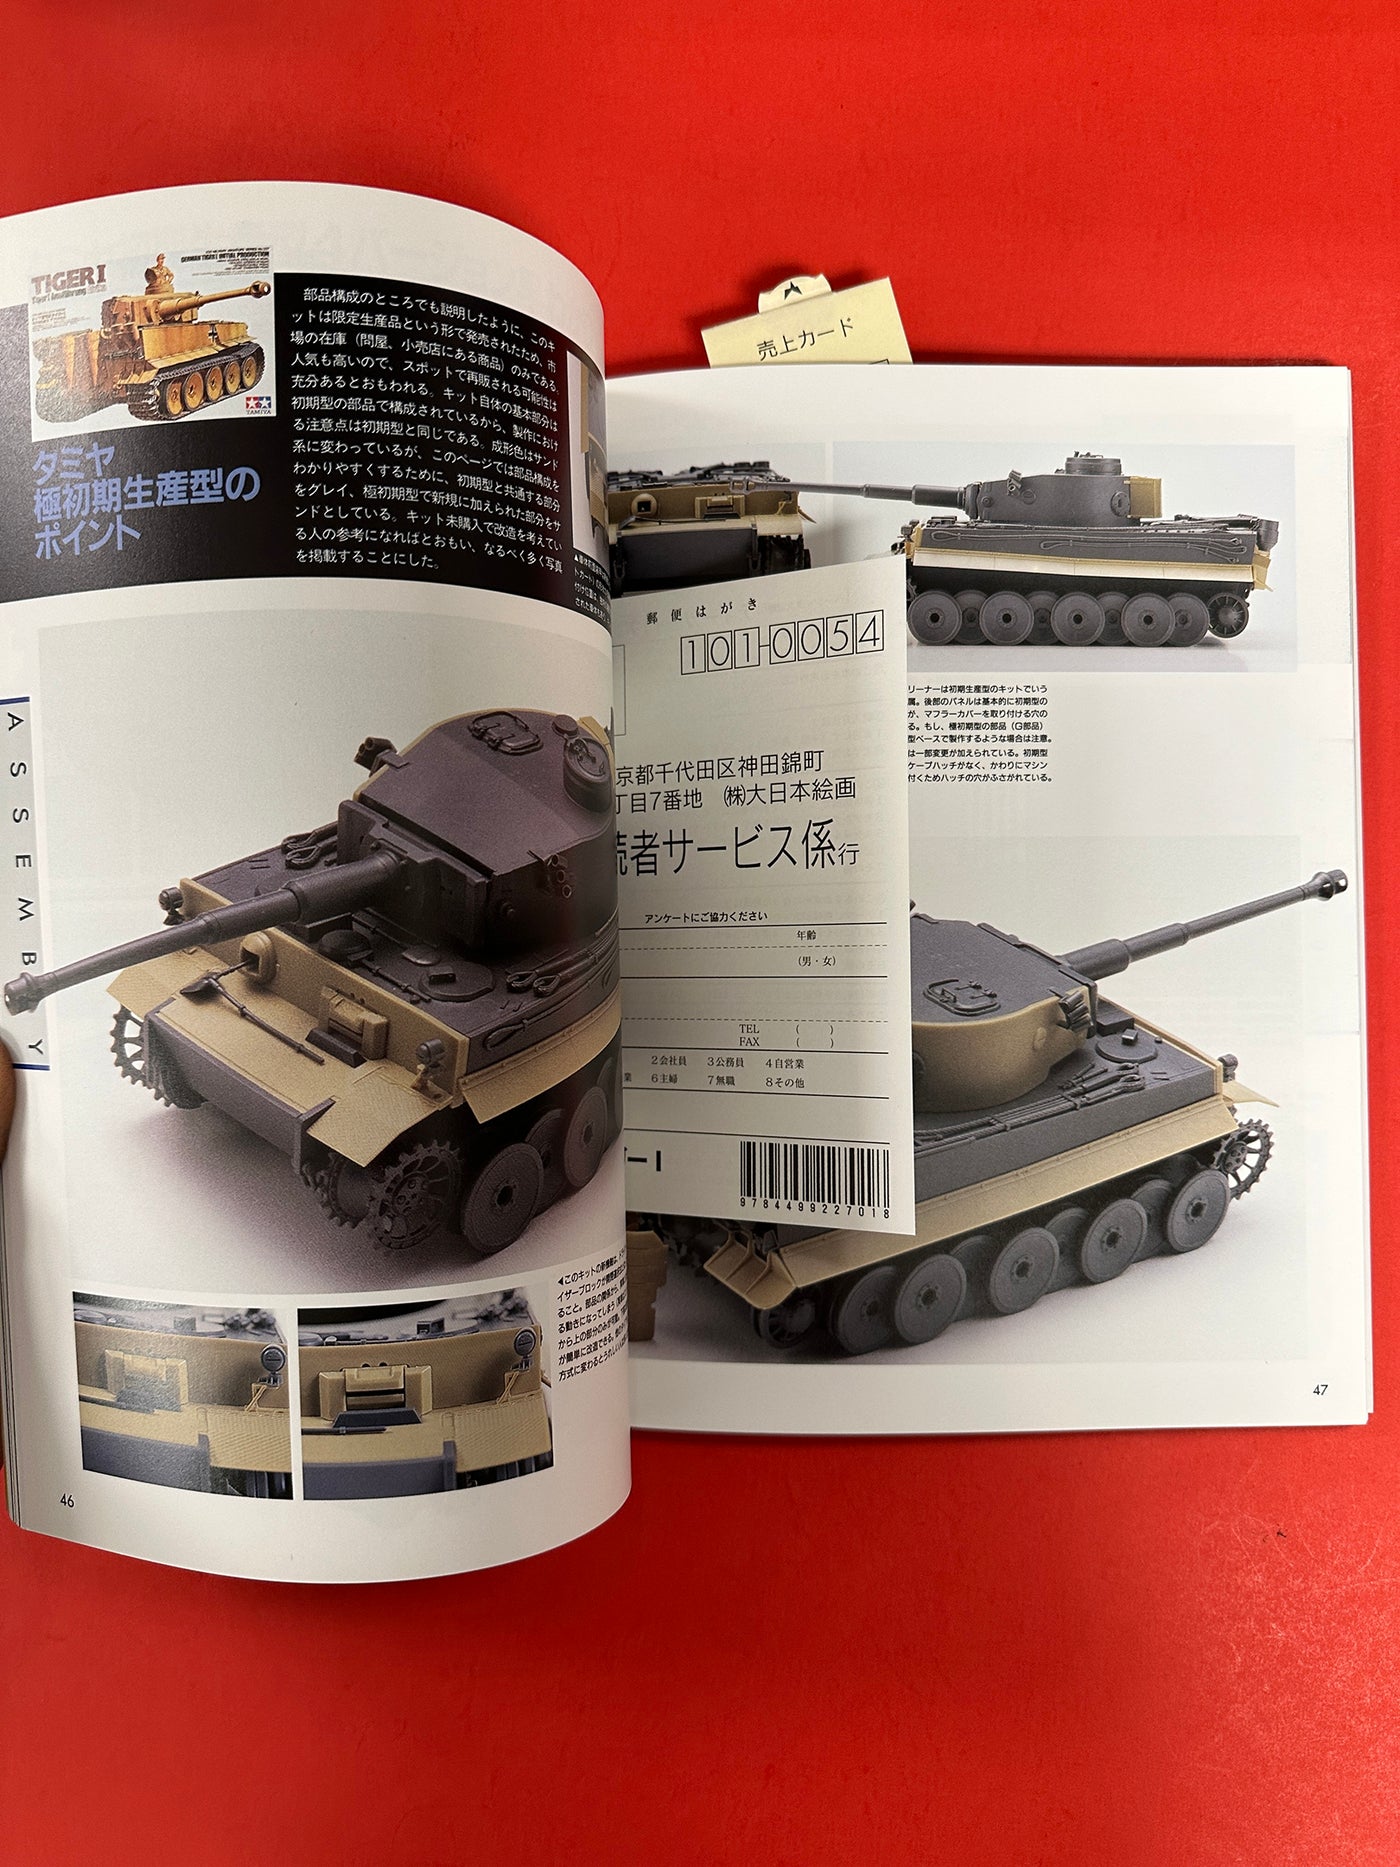 Modelling the TIGER I (Japanese Text)